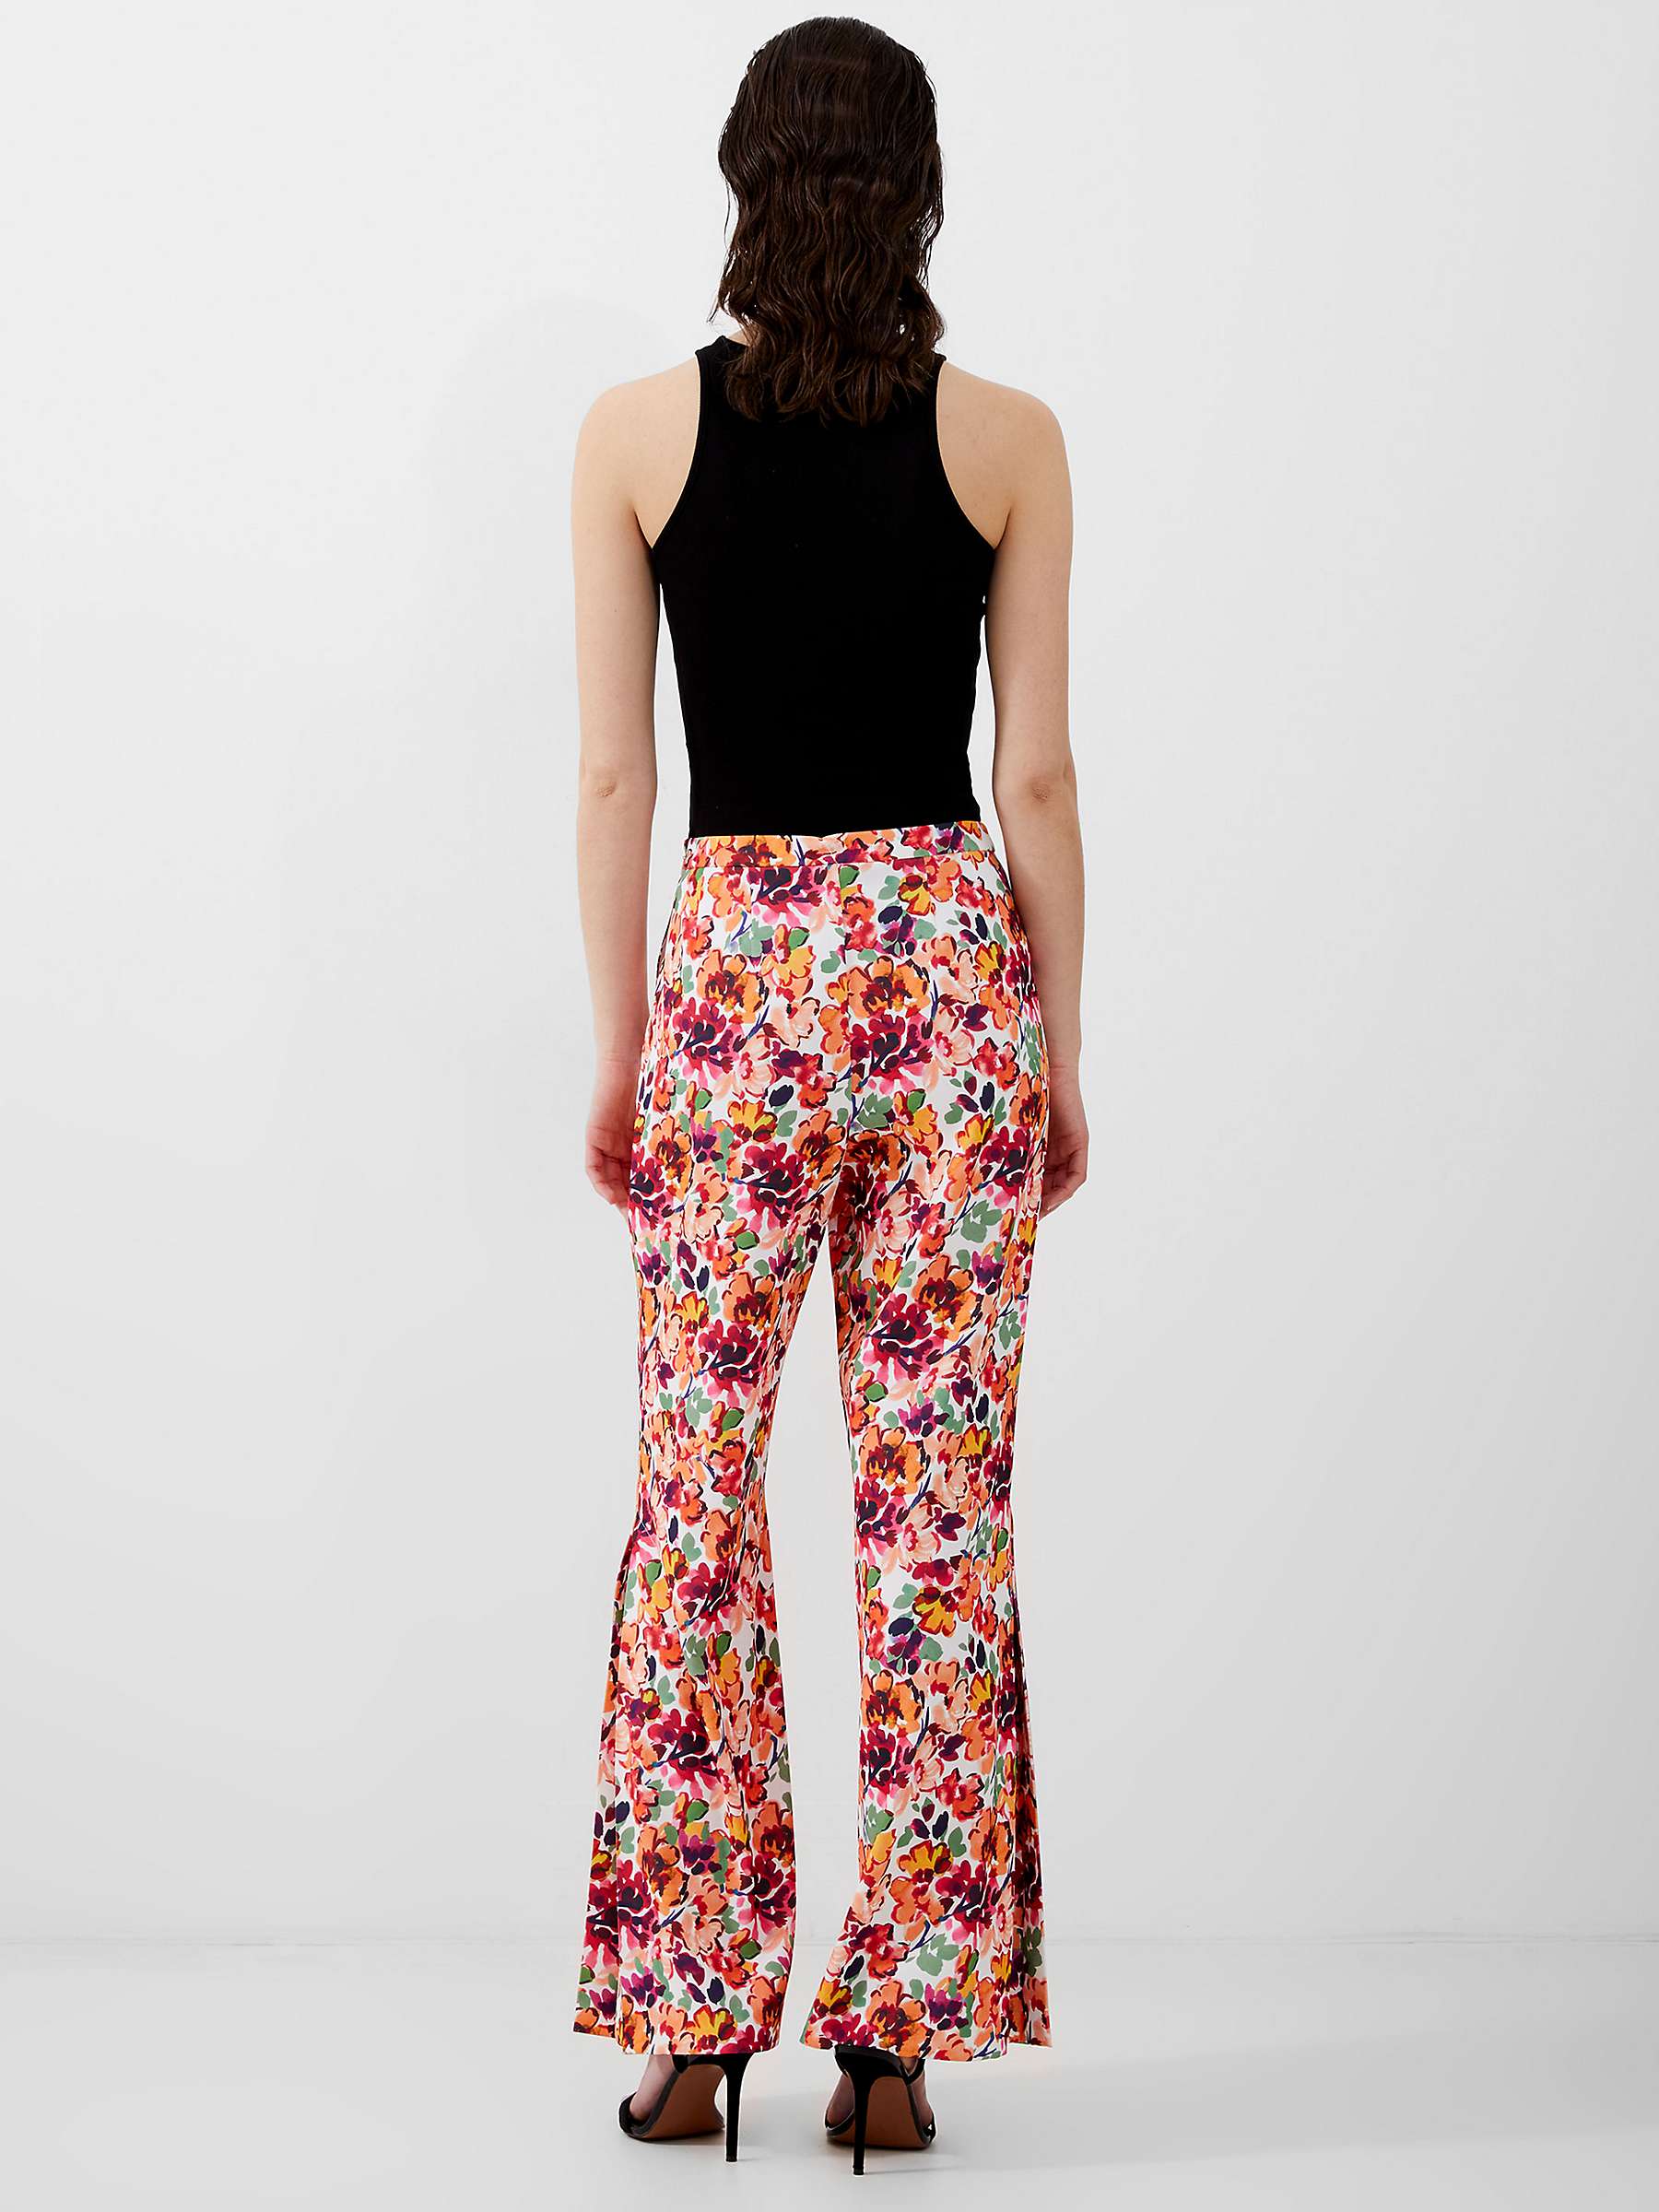 Buy French Connection Brenna Harrie Trousers, Melon Online at johnlewis.com